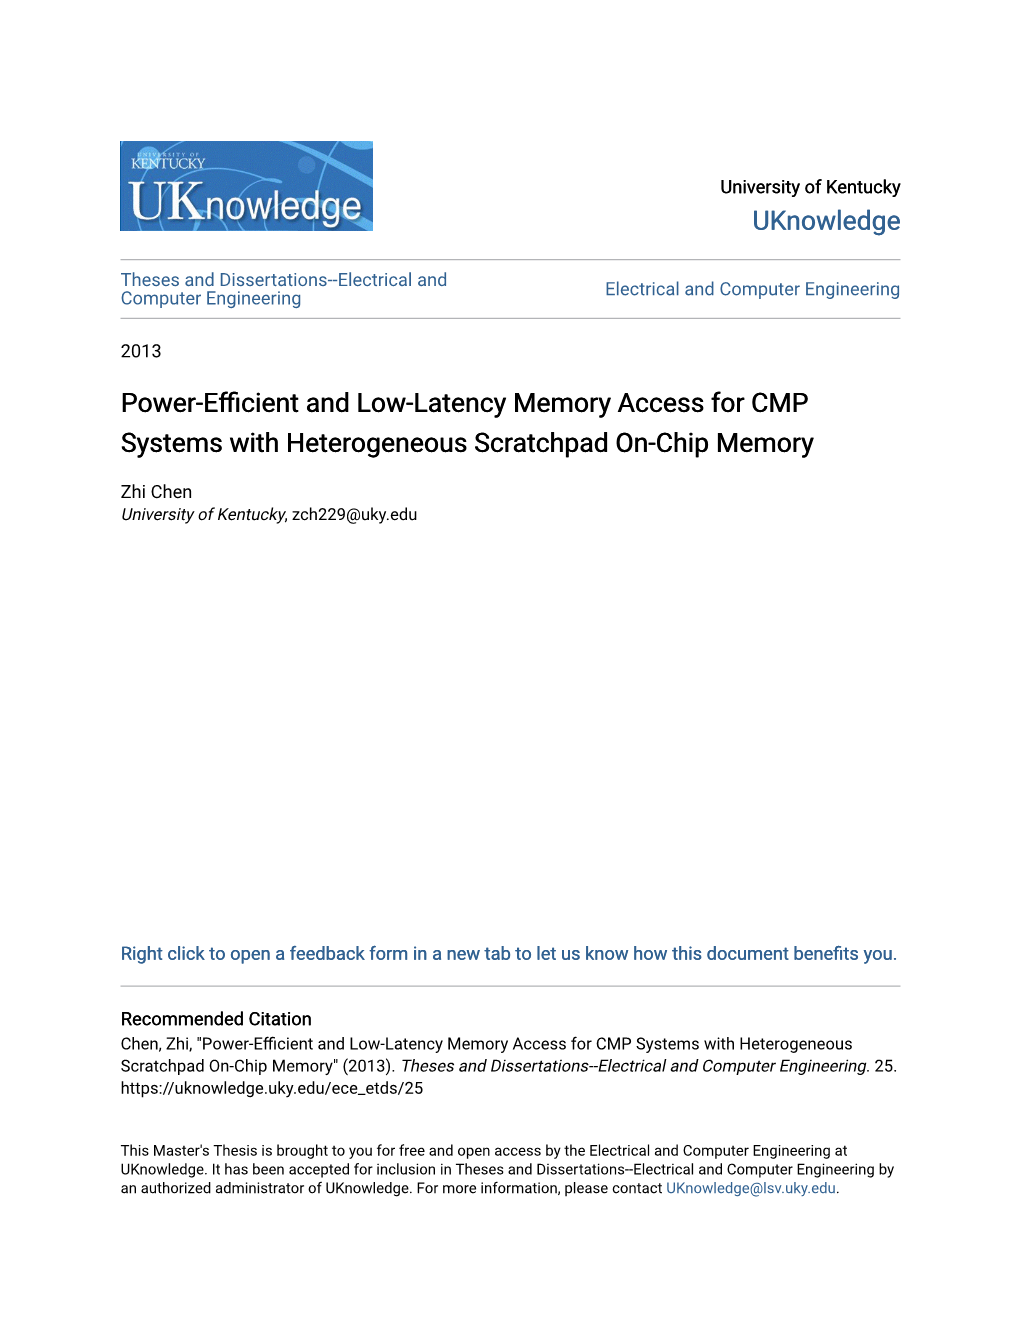 Power-Efficient and Low-Latency Memory Access for CMP Systems with Heterogeneous Scratchpad On-Chip Memory